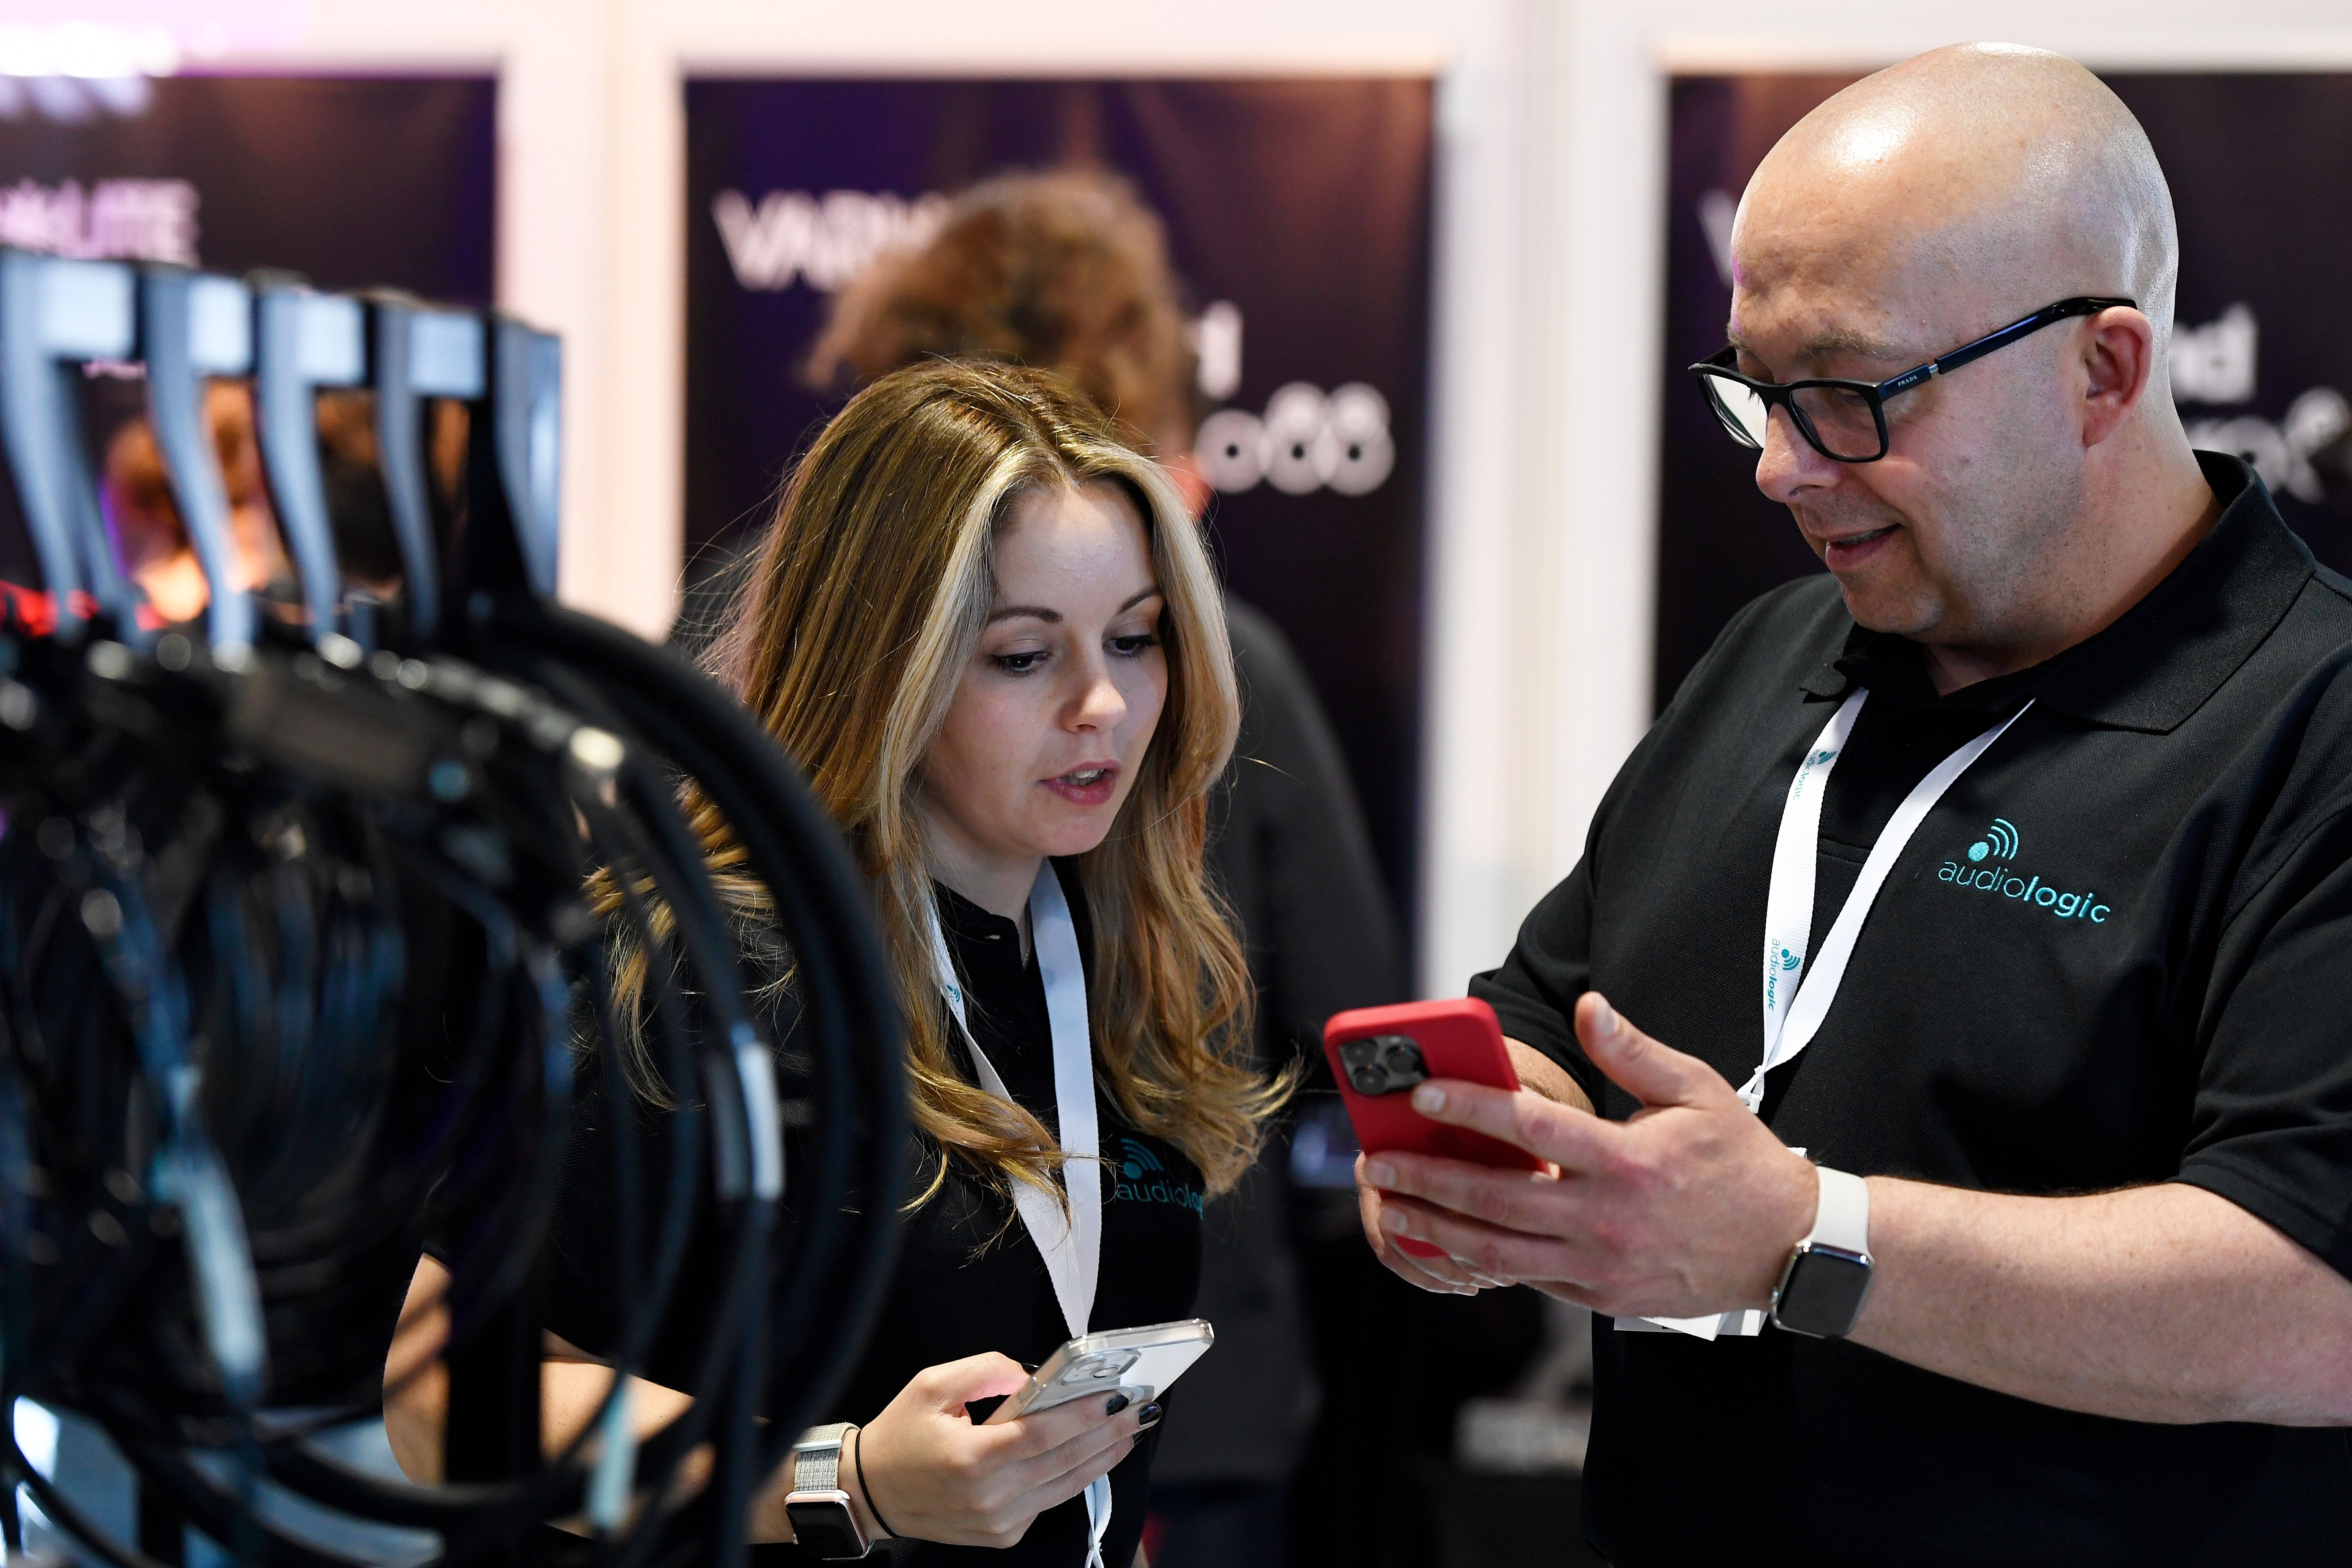 Audiologic employee talking to a young woman visitor at PLASA trade show in Leeds